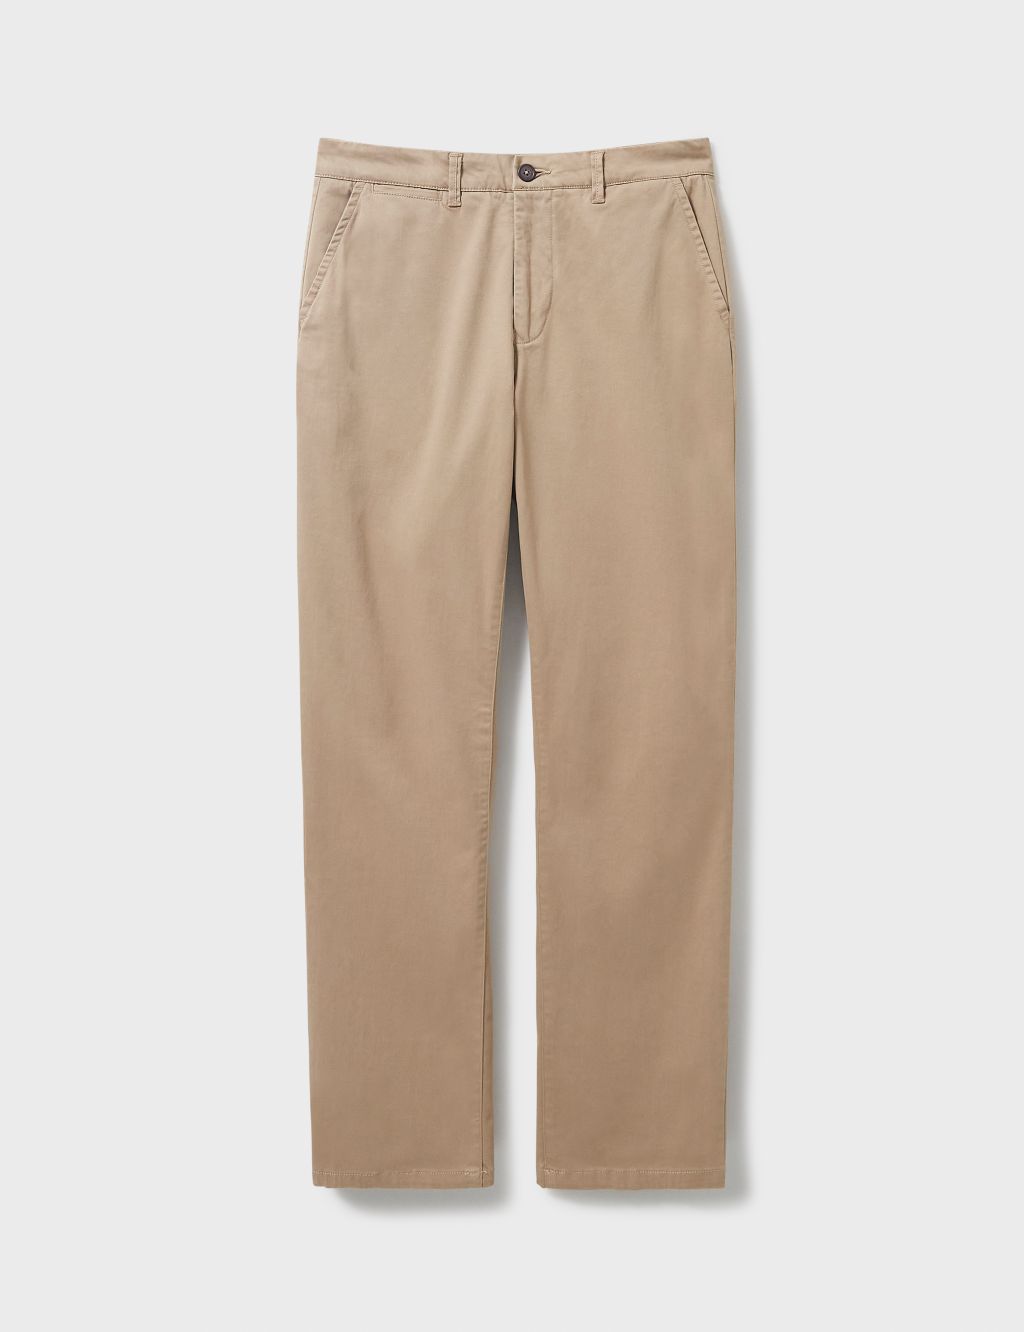 Straight Fit Chinos image 2